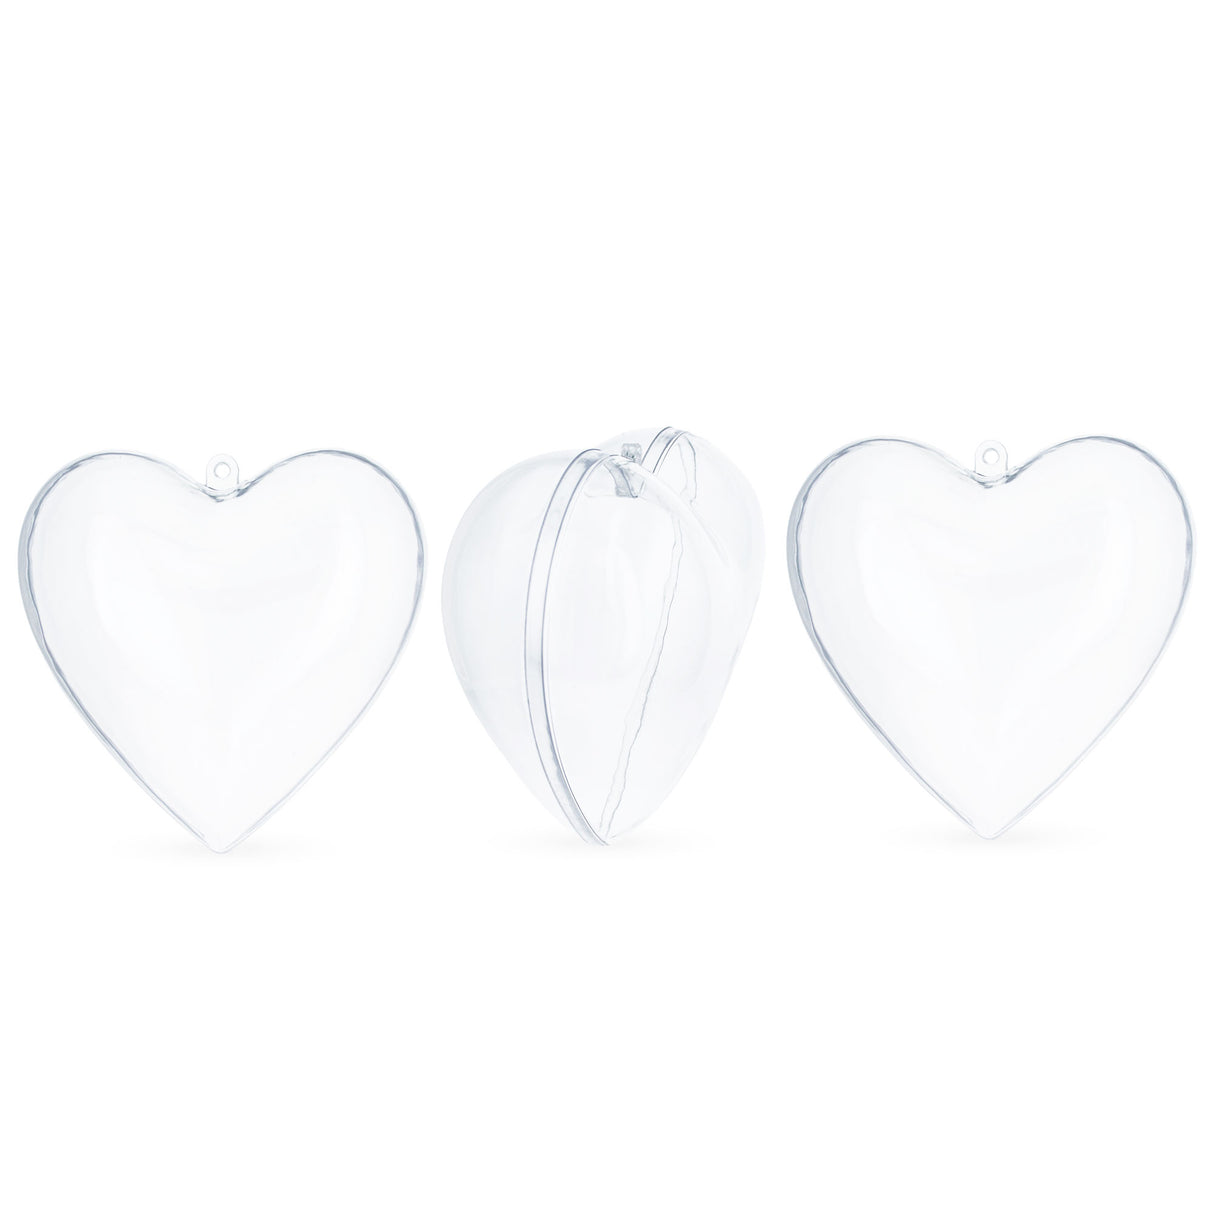 Set of 3 Clear Plastic Heart Ornament 4.6 Inches (117 mm) in Clear color, Heart shape